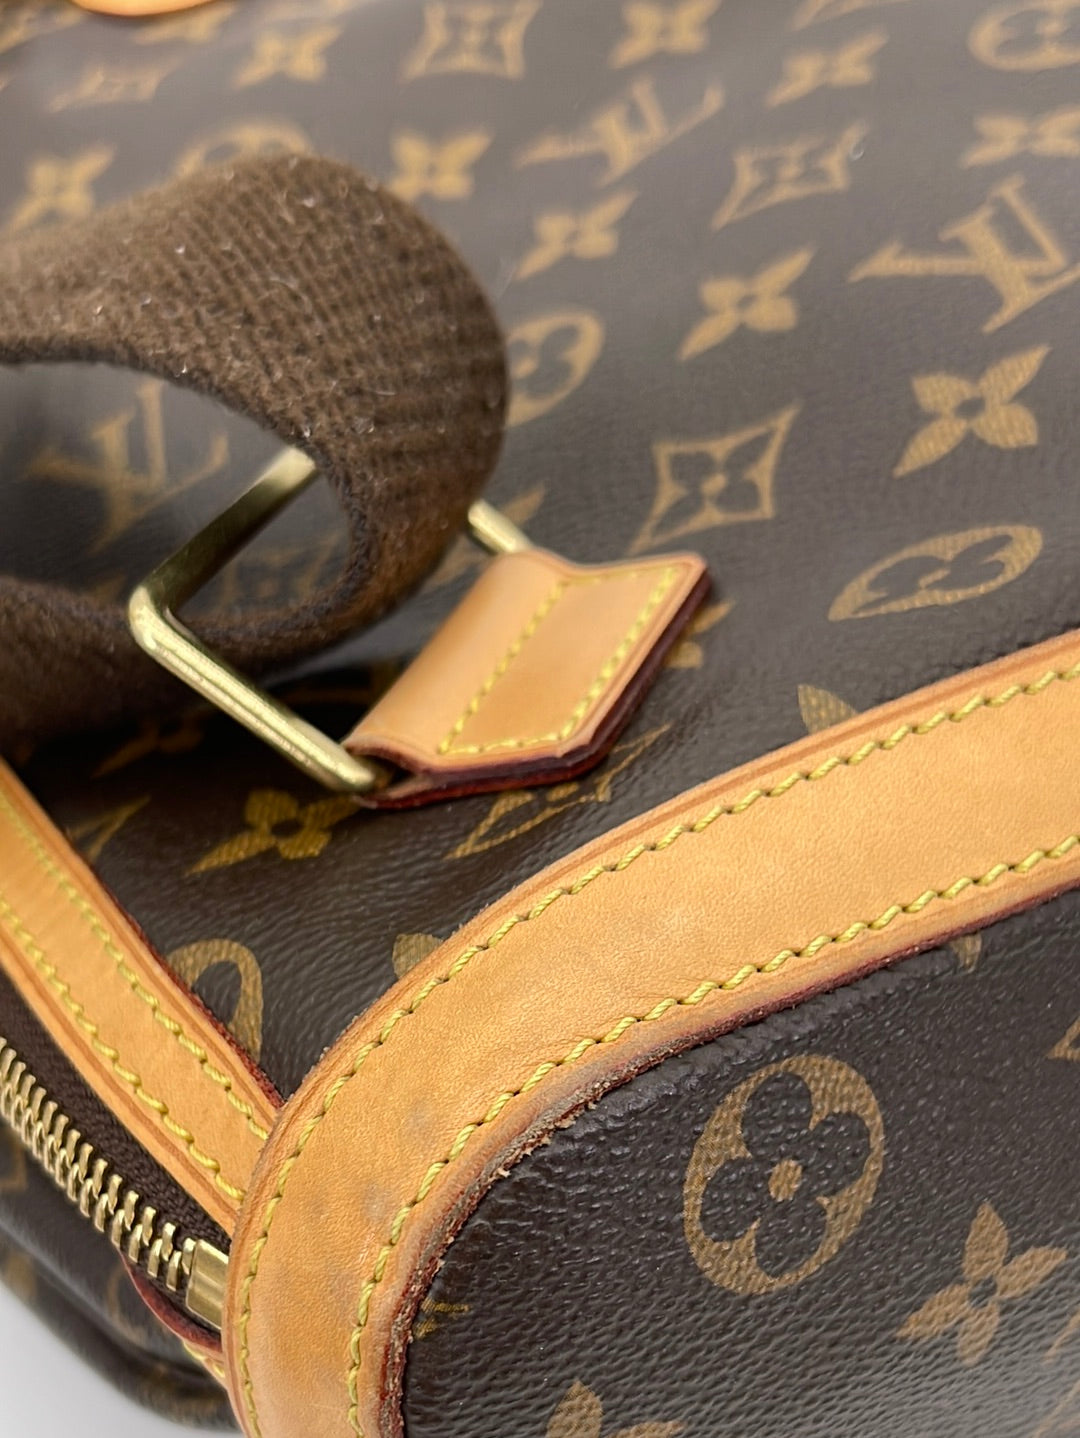 PRE-OWNED LOUIS VUITTON SAC A DPre-Owned Louis Vuitton Sac a Dos Bosphore  Monogram Canvas Backpack